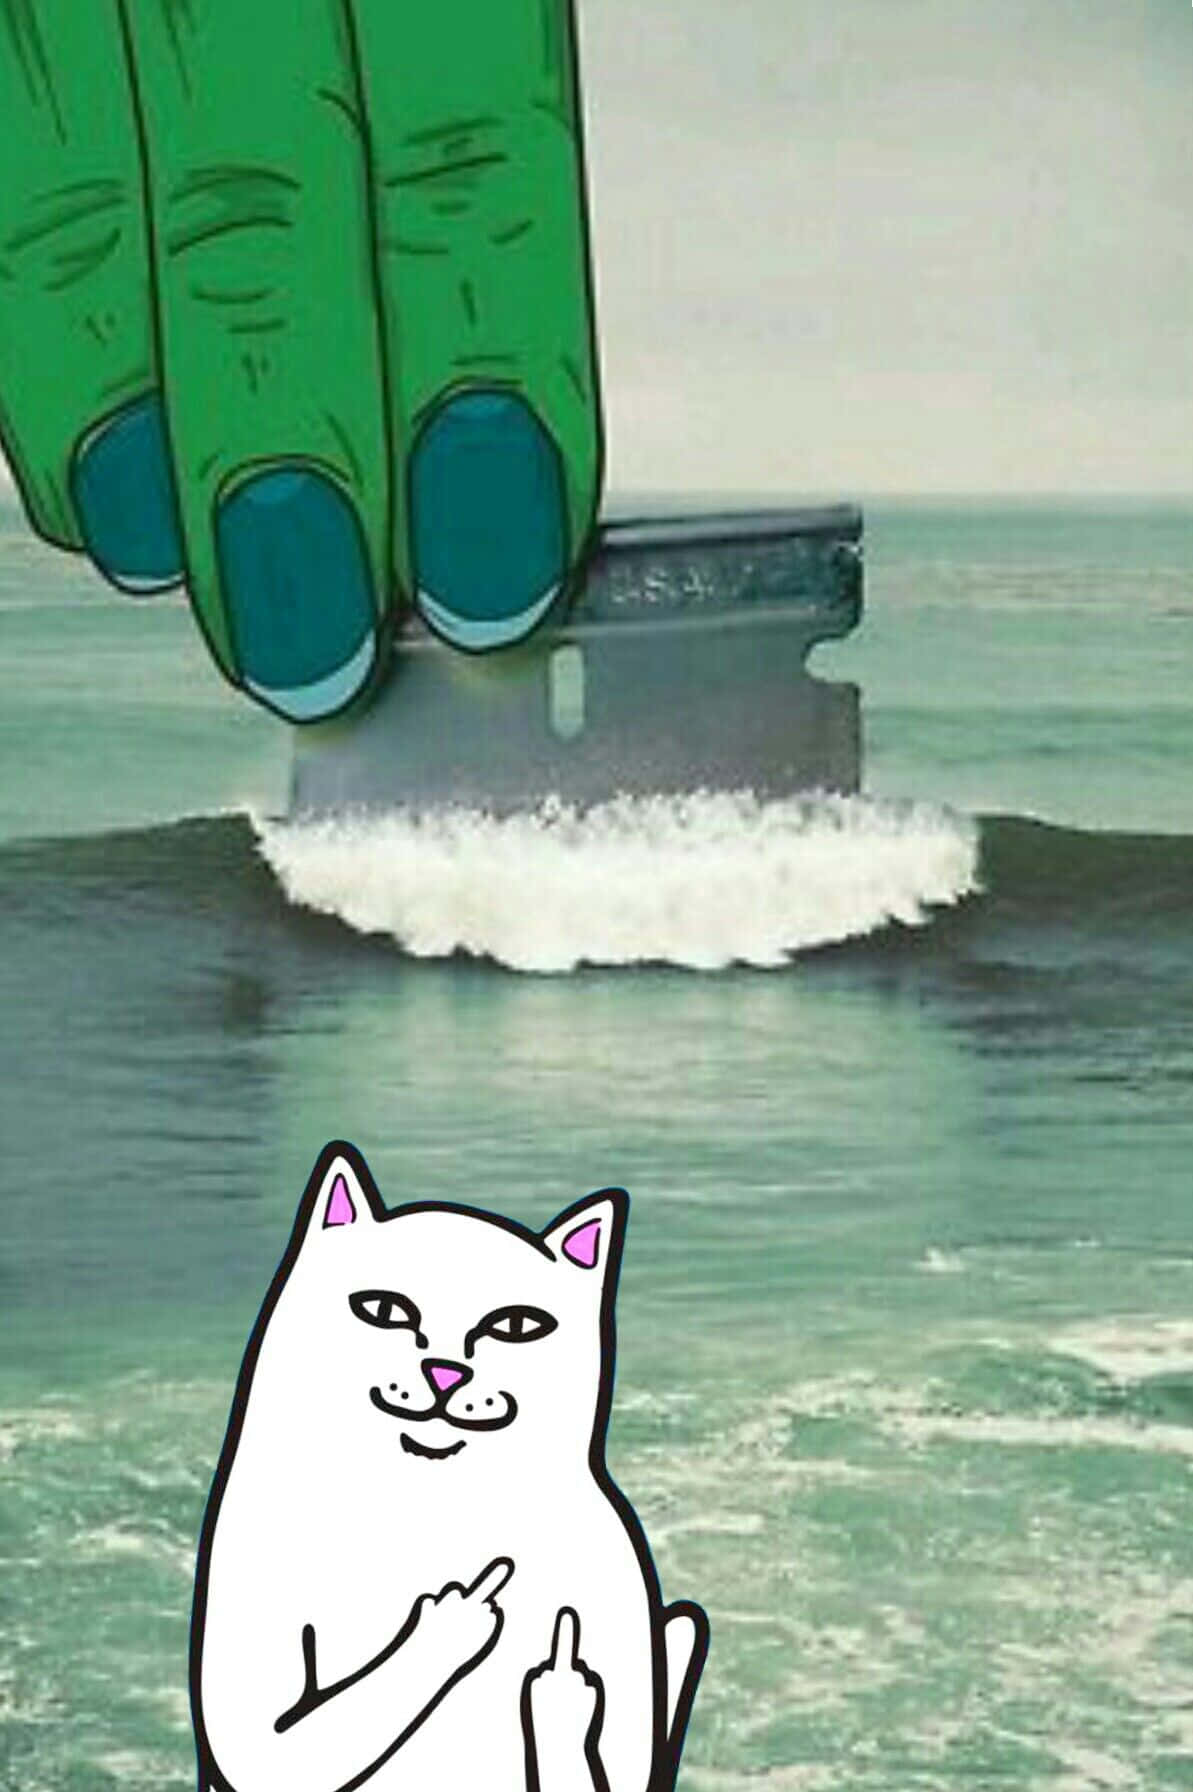 Who Else But Ripndip Is Always Here To Brighten Your Day?